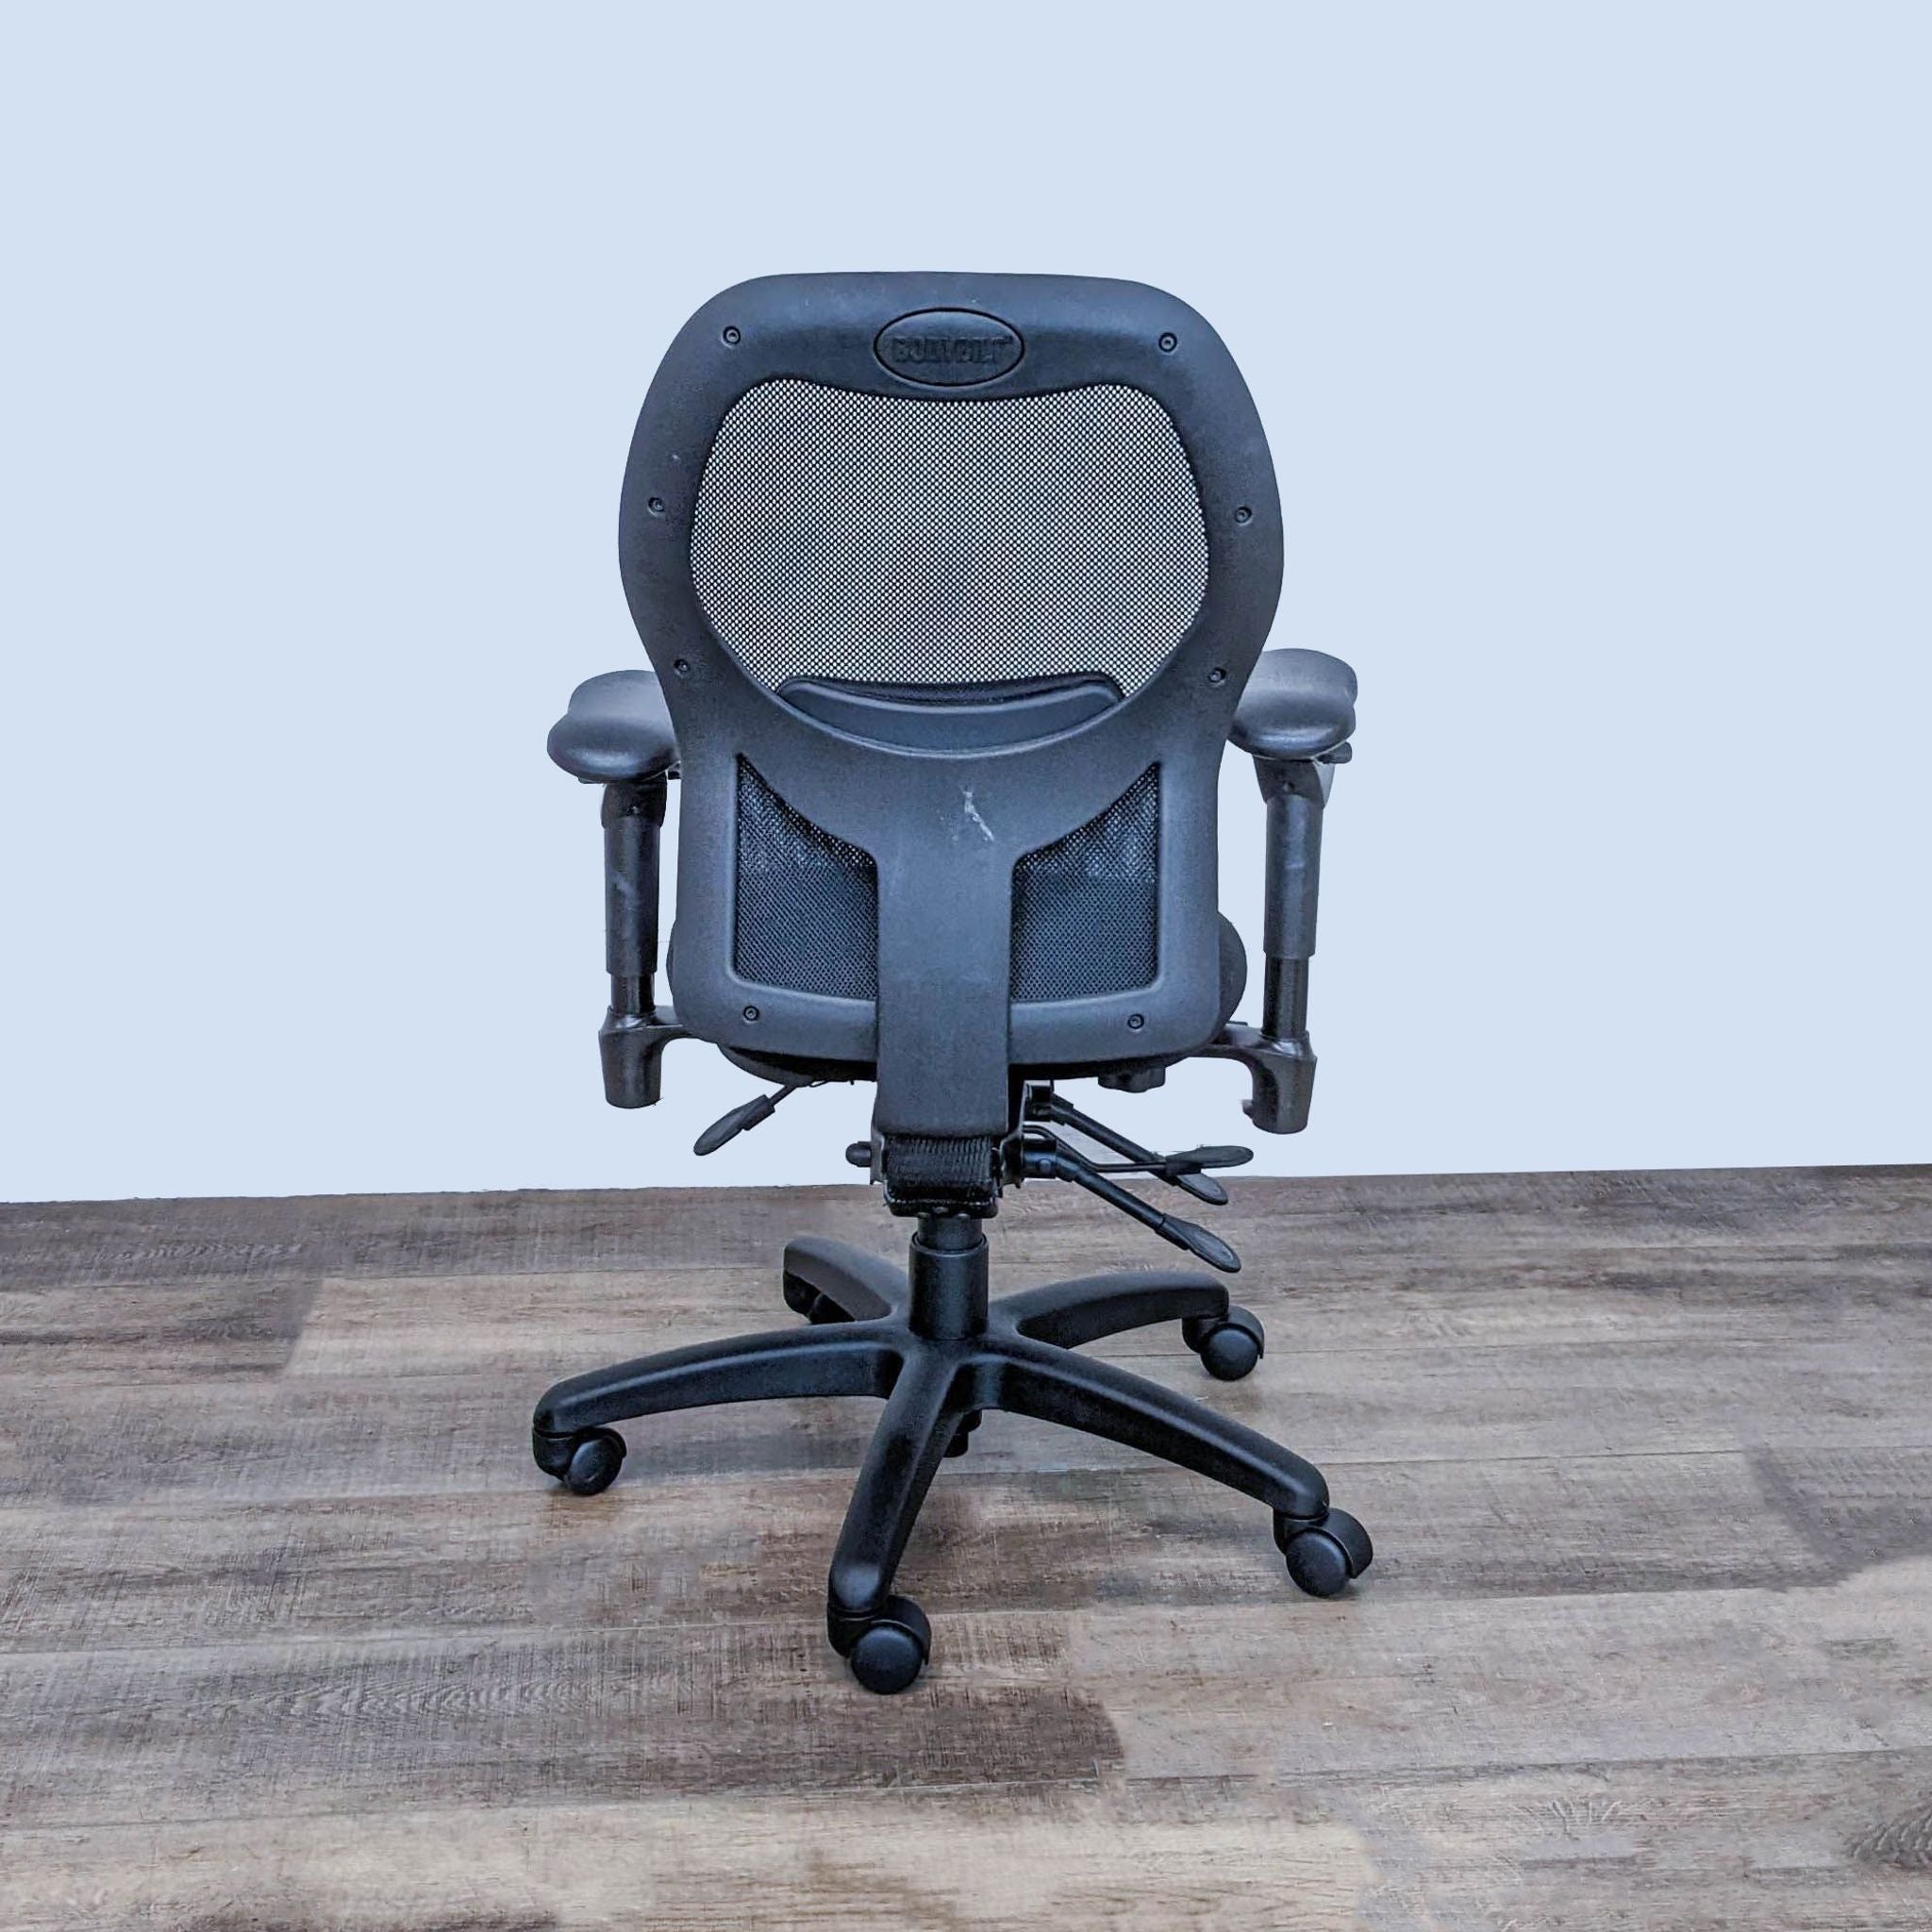 Bodybilt ergonomic office chair with mesh back, lumbar support, and adjustable armrests on a wooden floor.